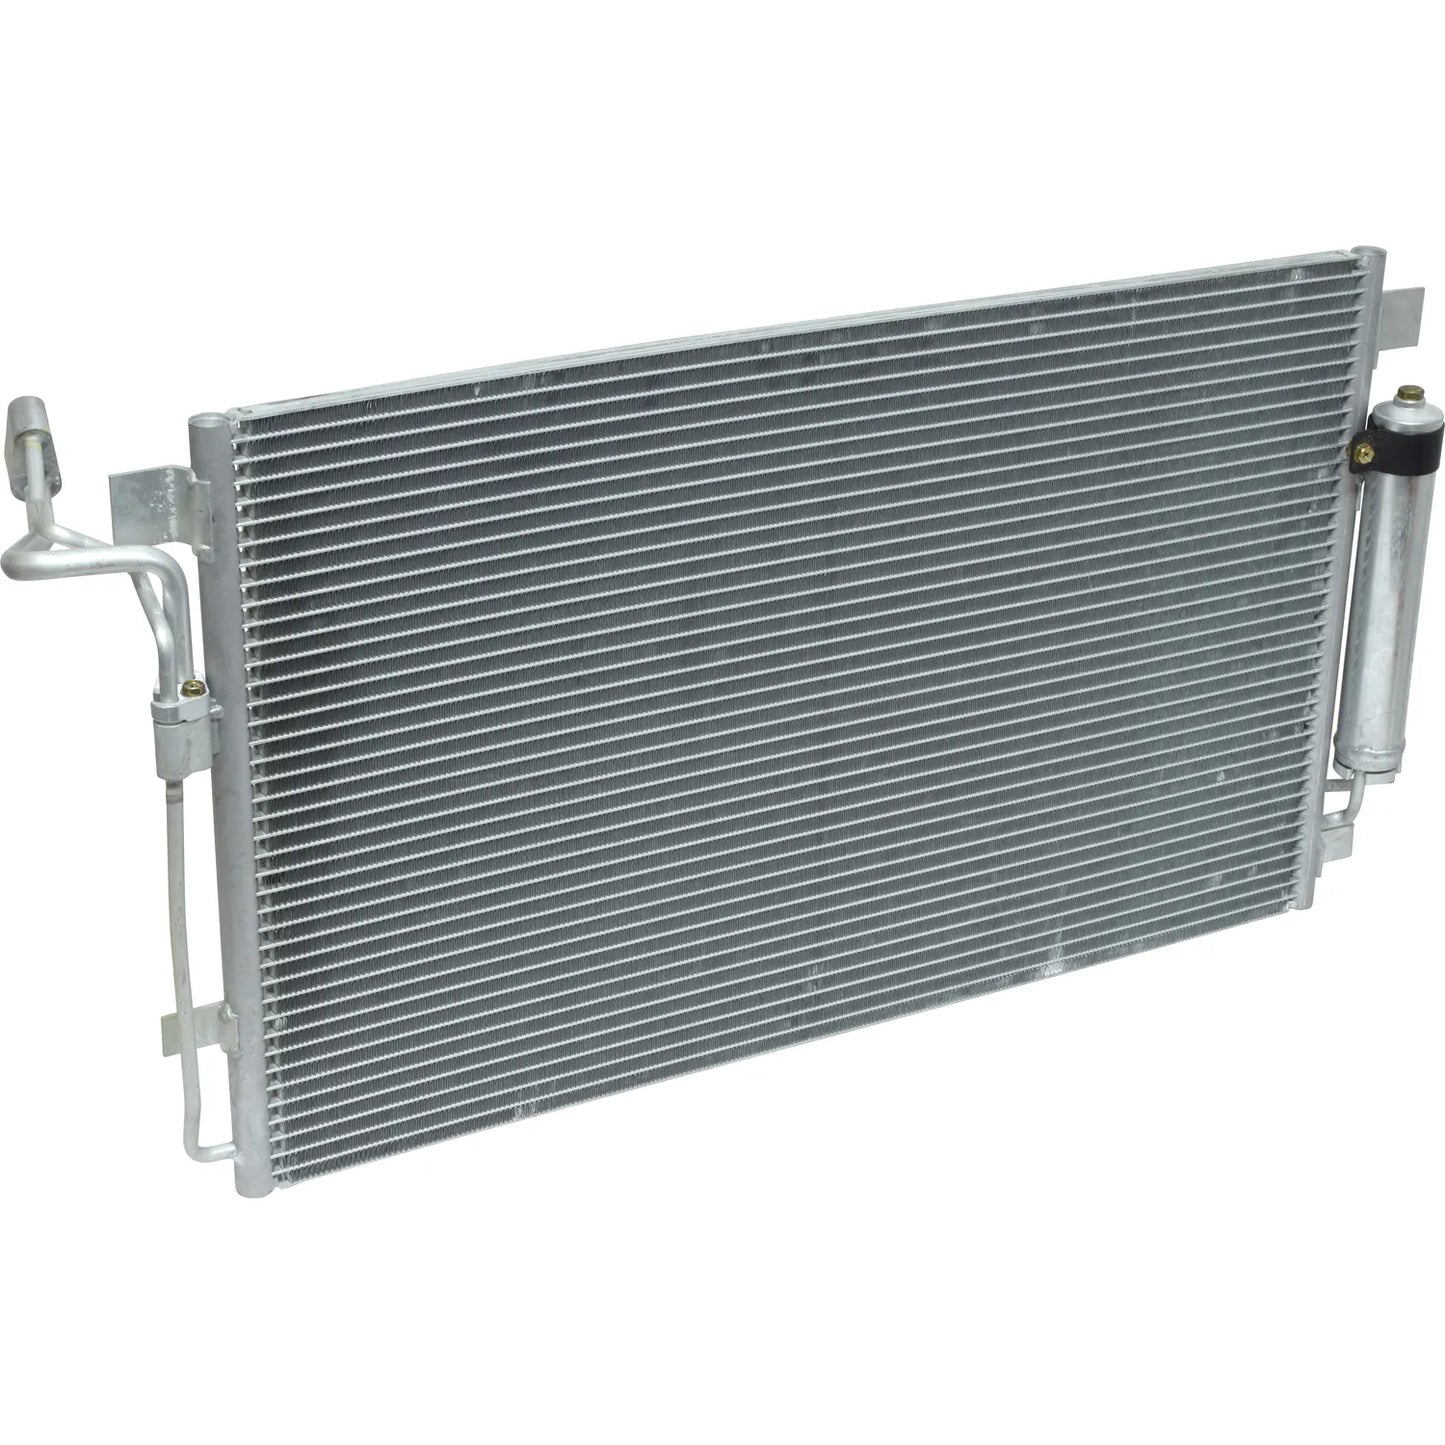 A/C Condenser Parallel Flow for 2012-2007 Nissan Altima